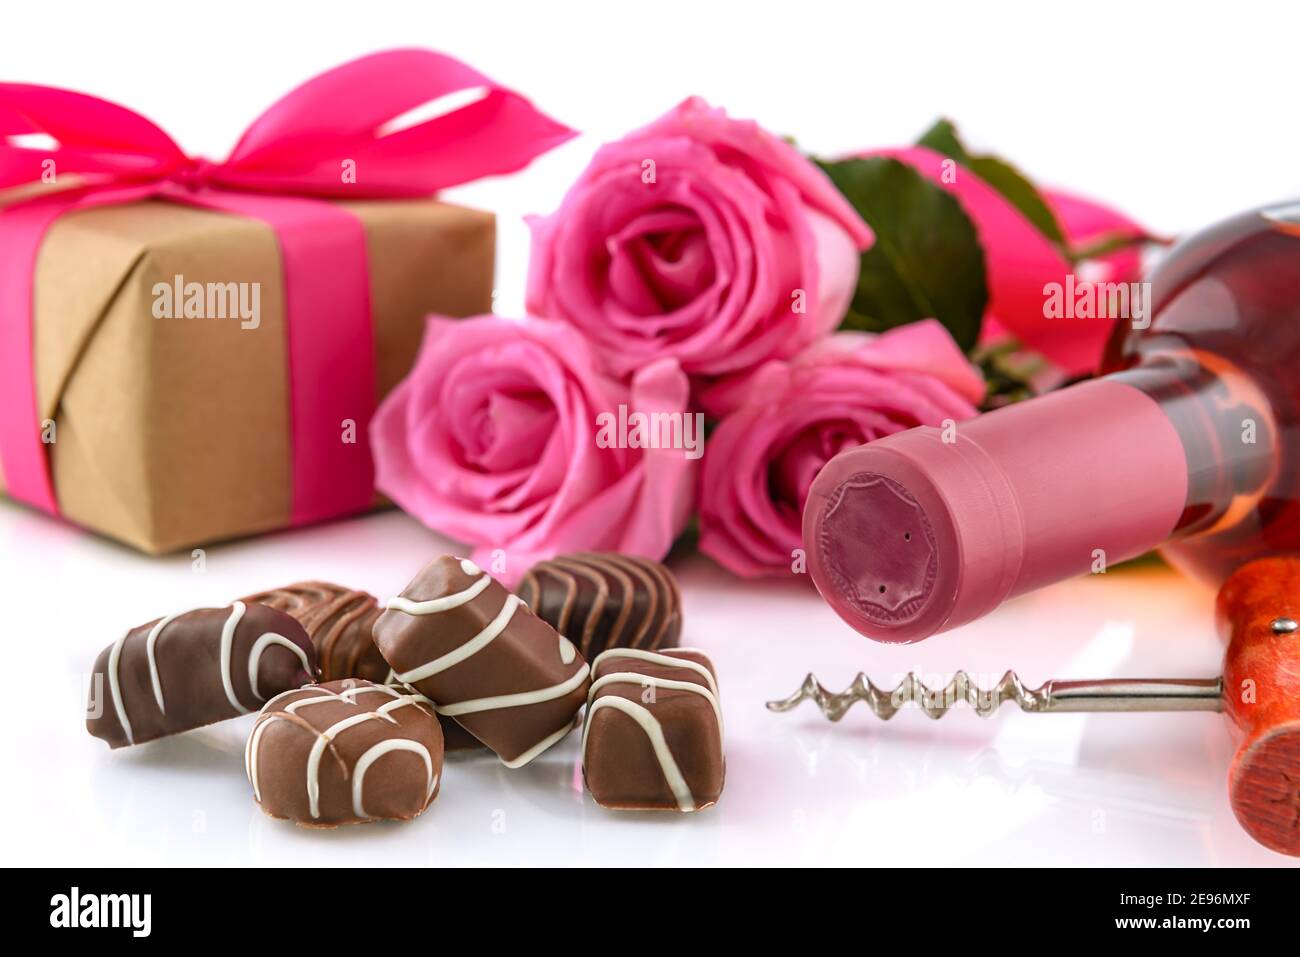 Valentine's Day concept. Delicious chocolate pralines, wine bottle, corkscrew, pink roses and gift box on a white background. Selective focus. Stock Photo